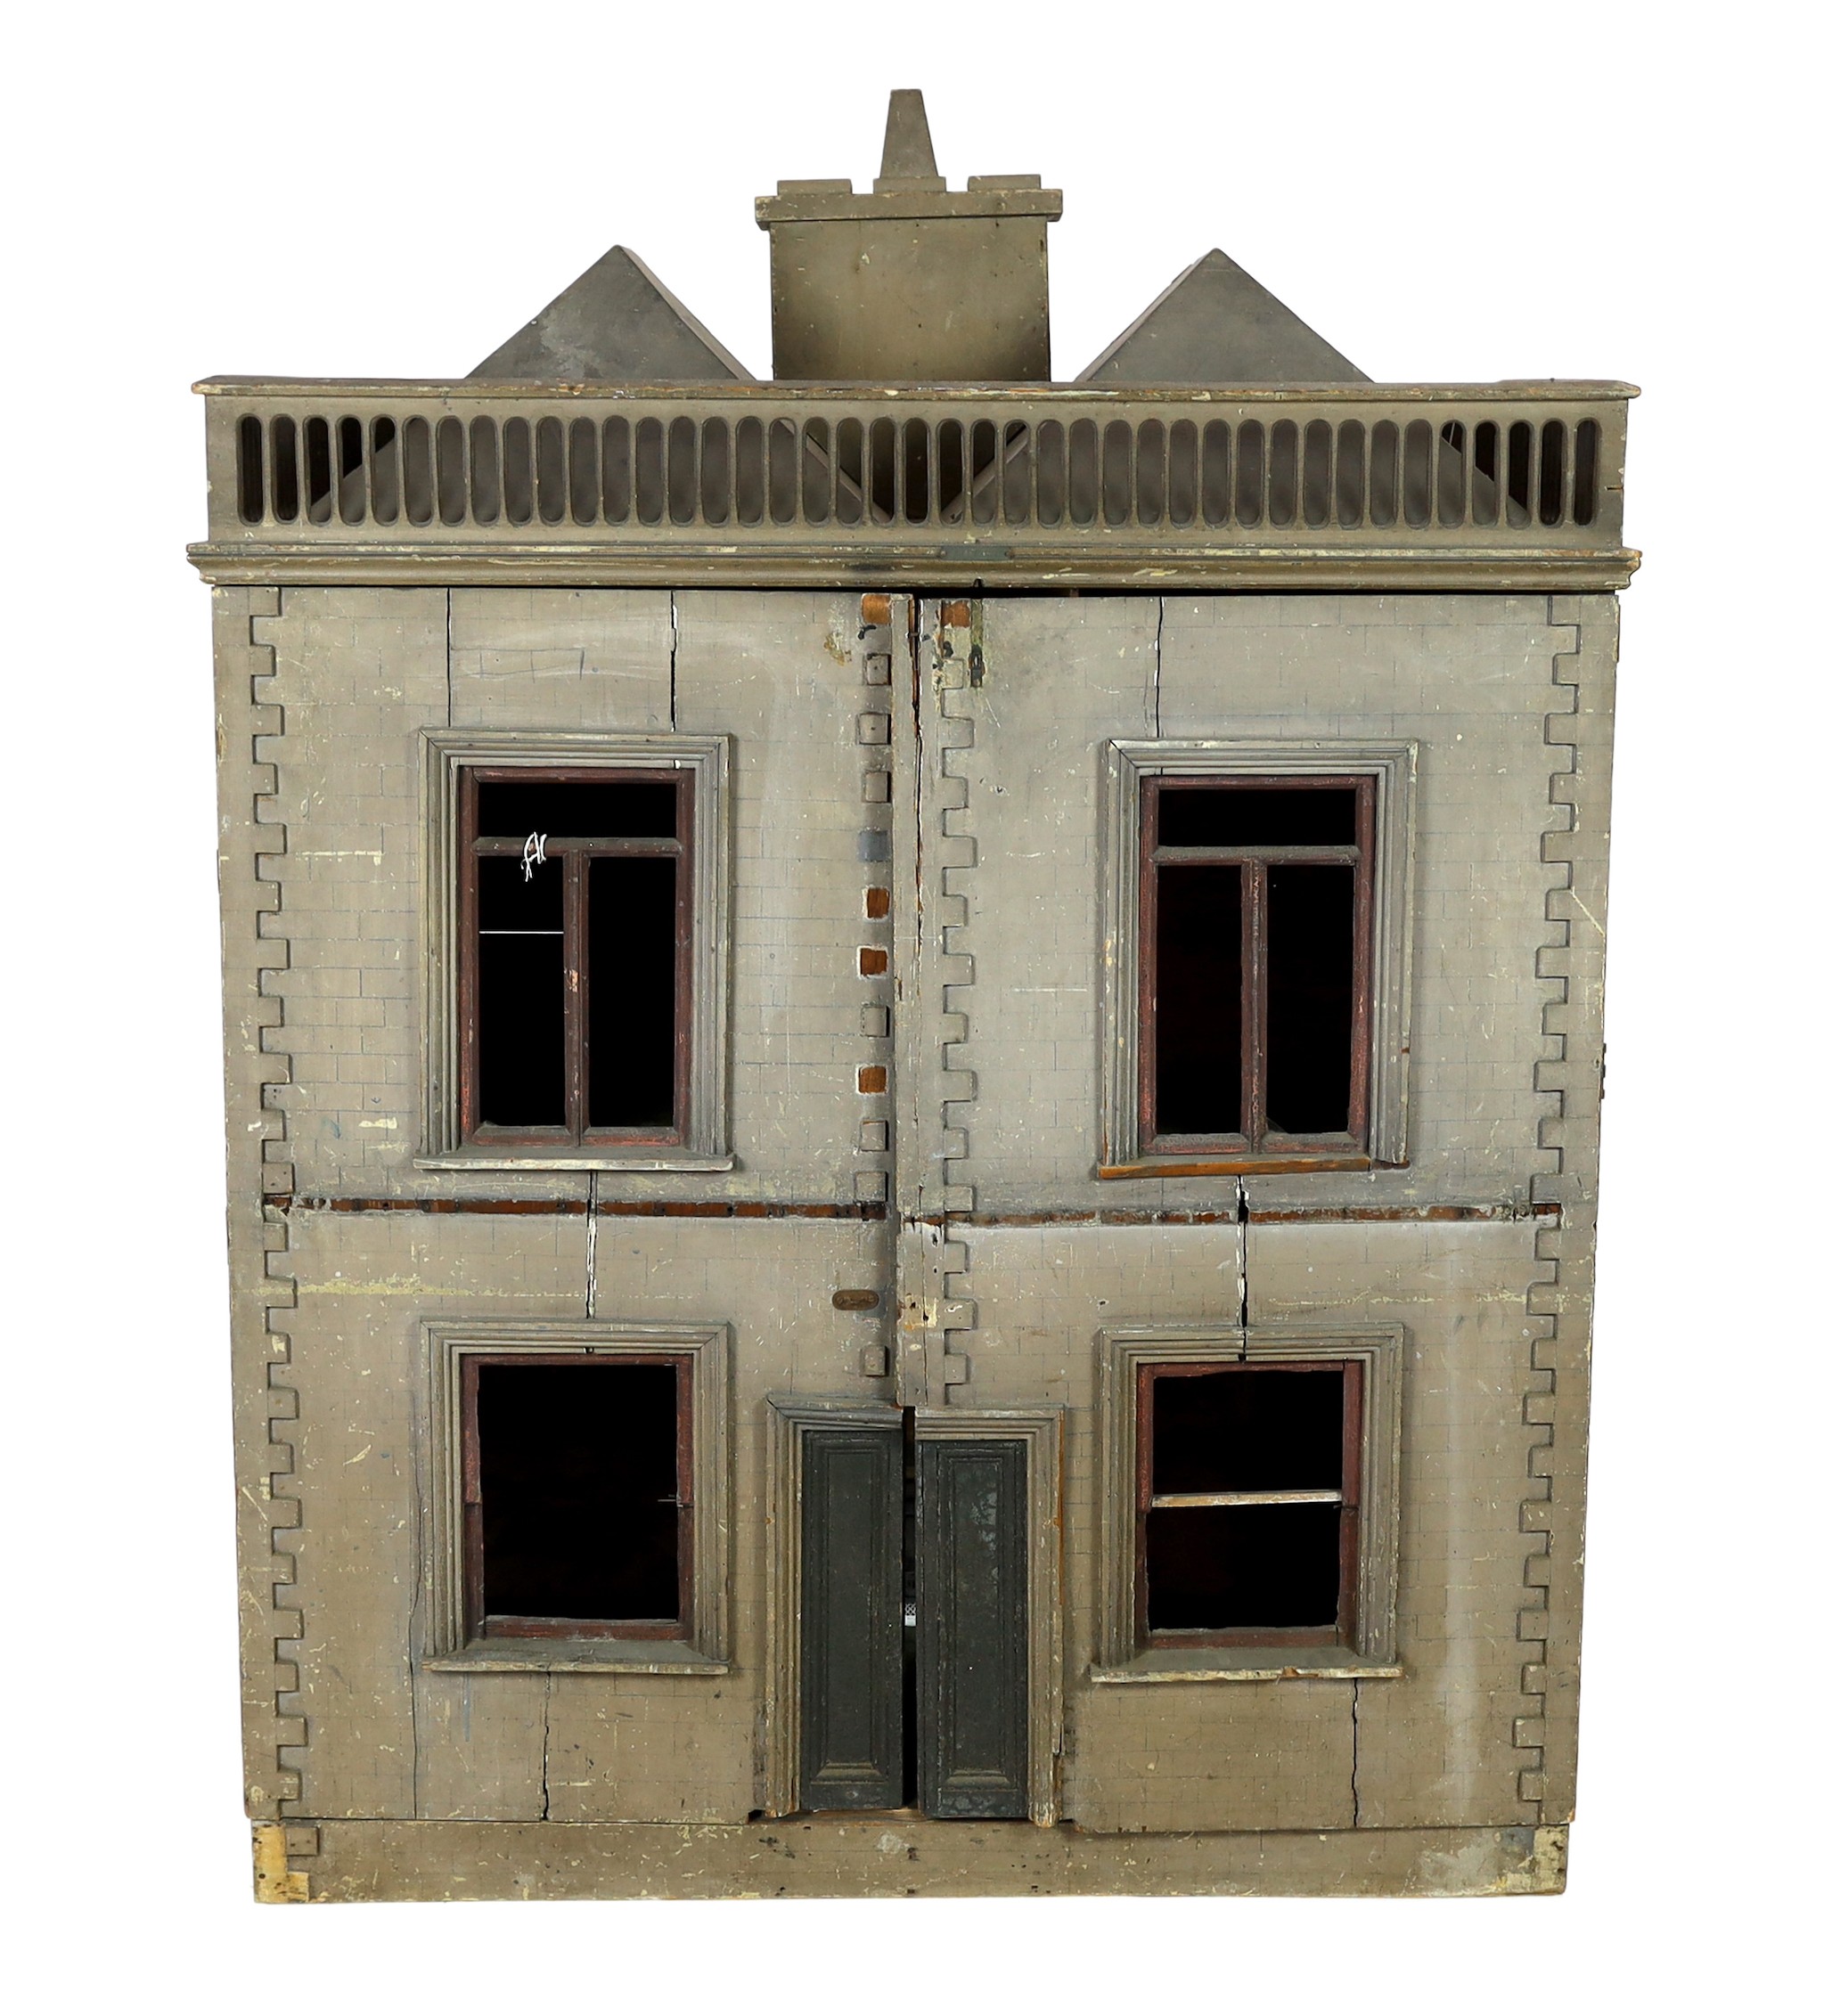 A very large English dolls’ house, circa 1840-1850, with a central panelled door and large windows